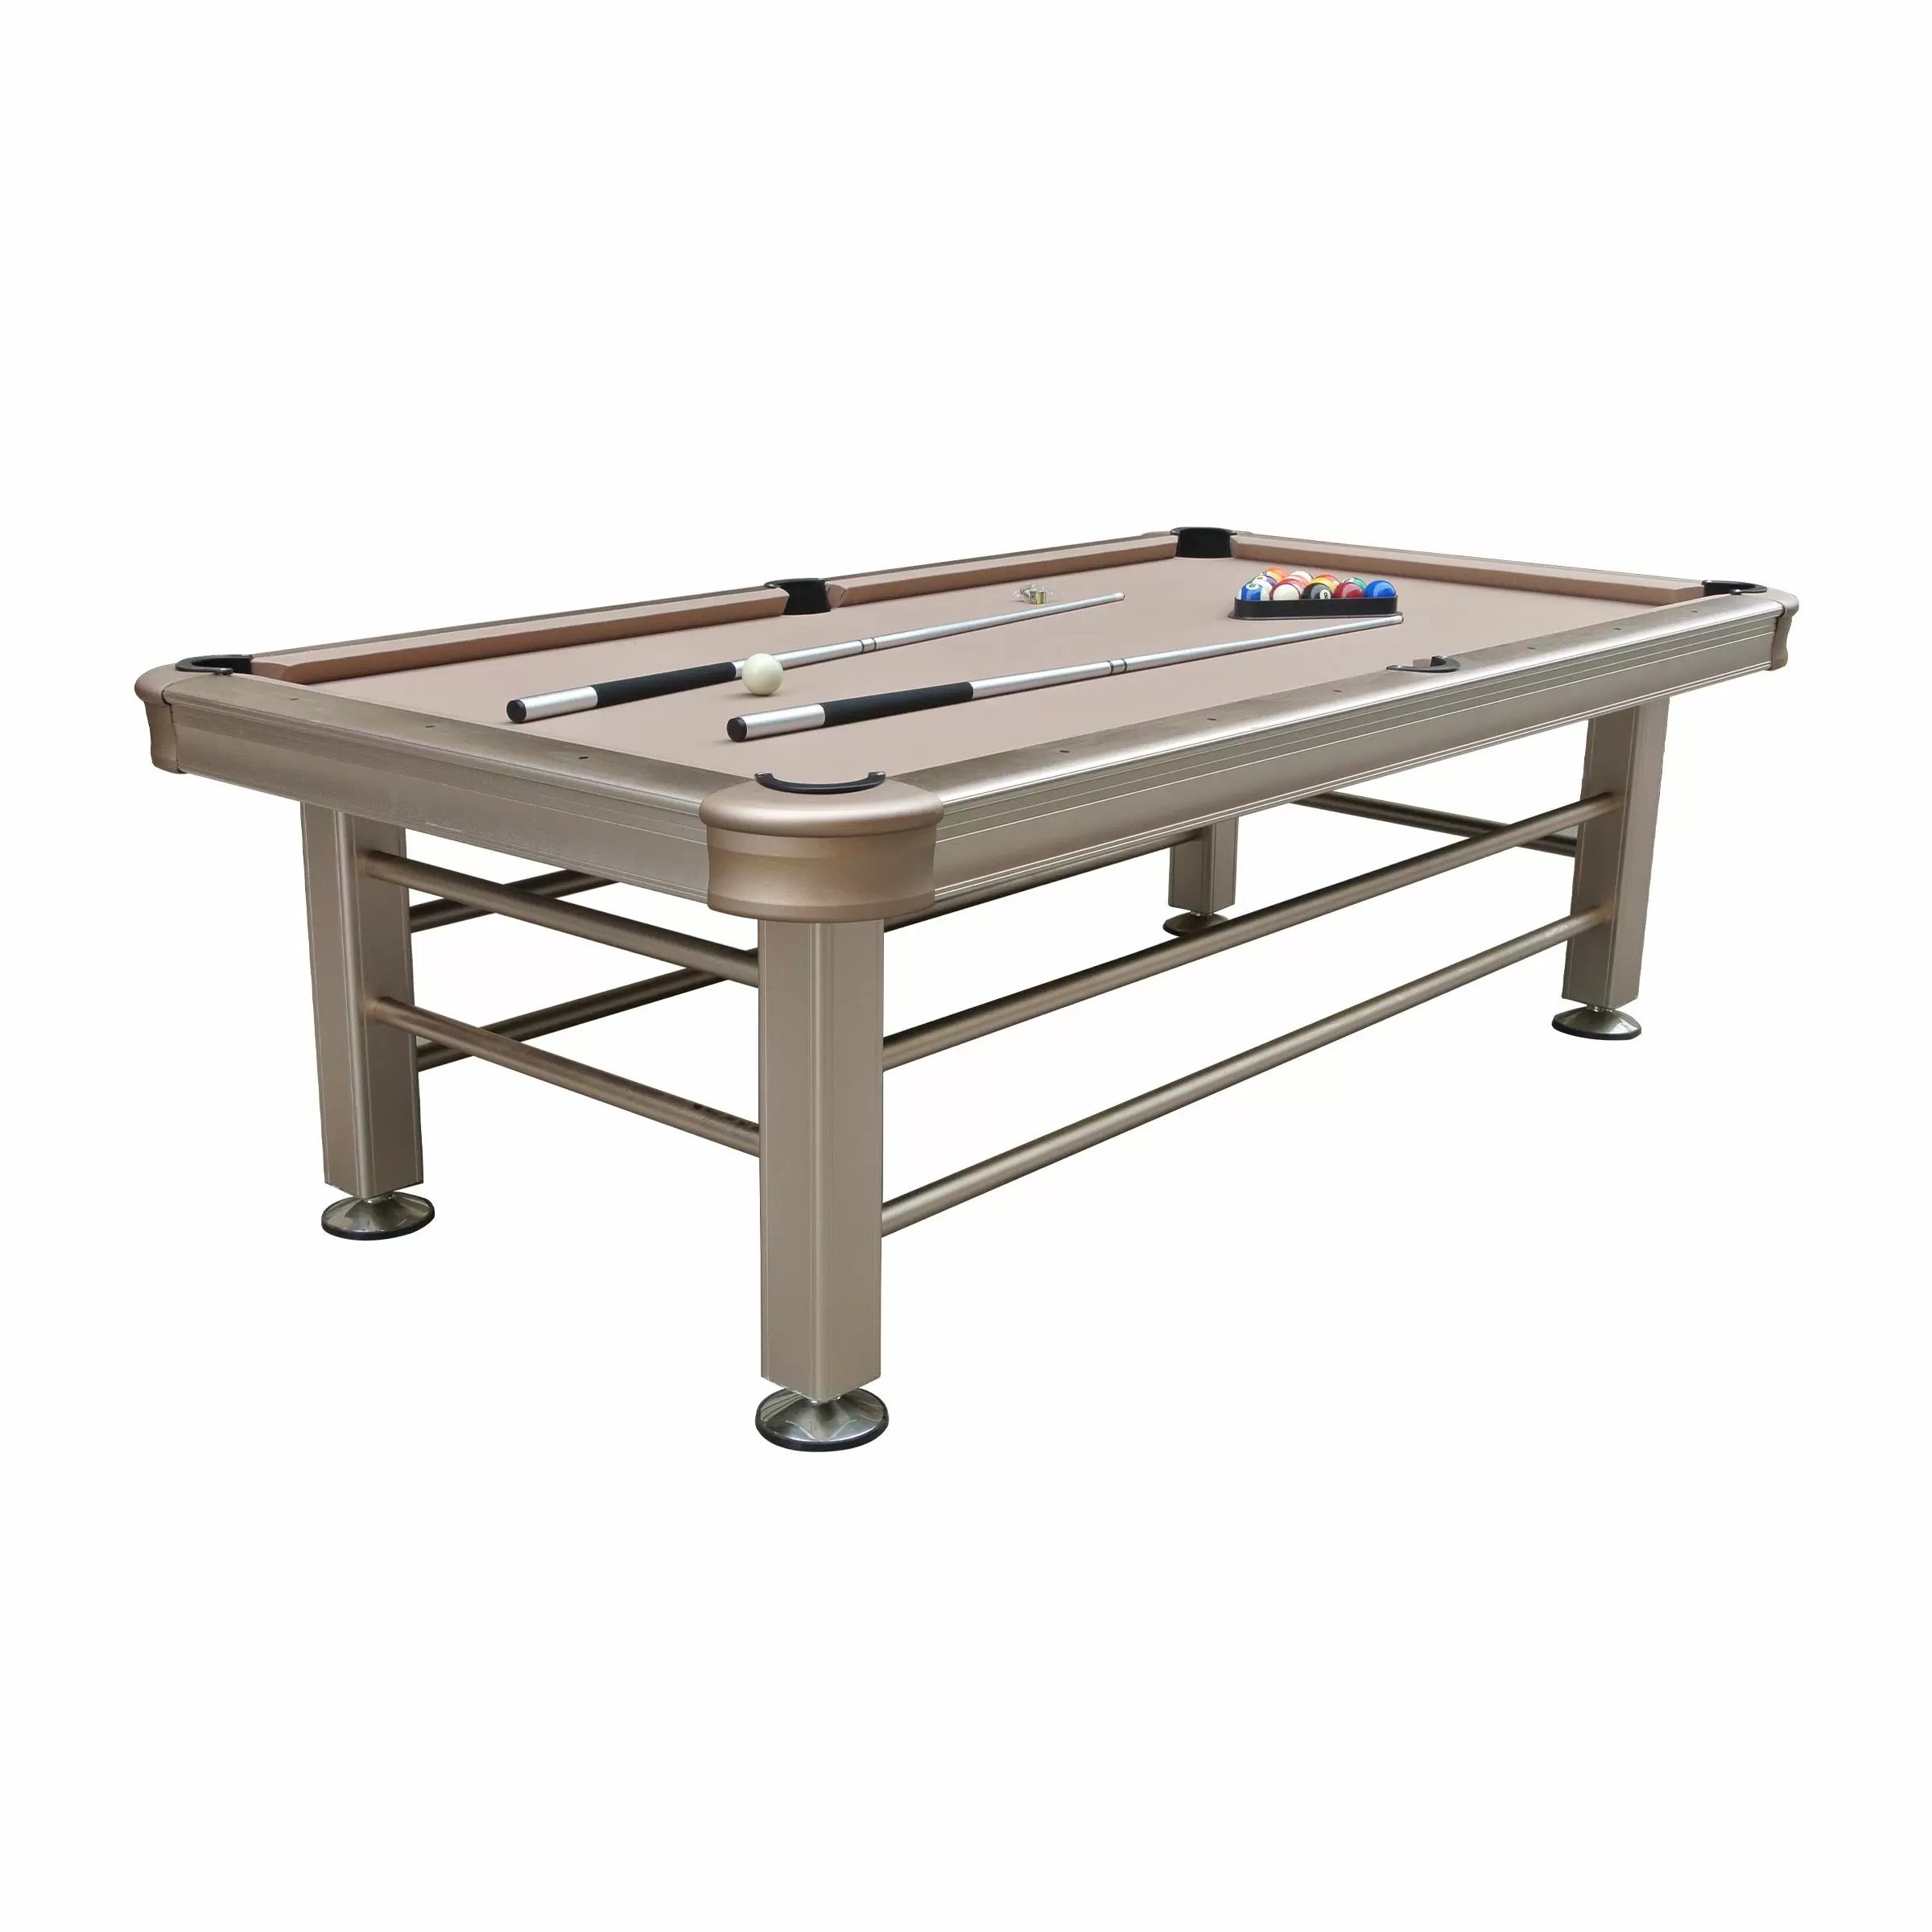 Imperial 8ft Outdoor Pool Table Champagne